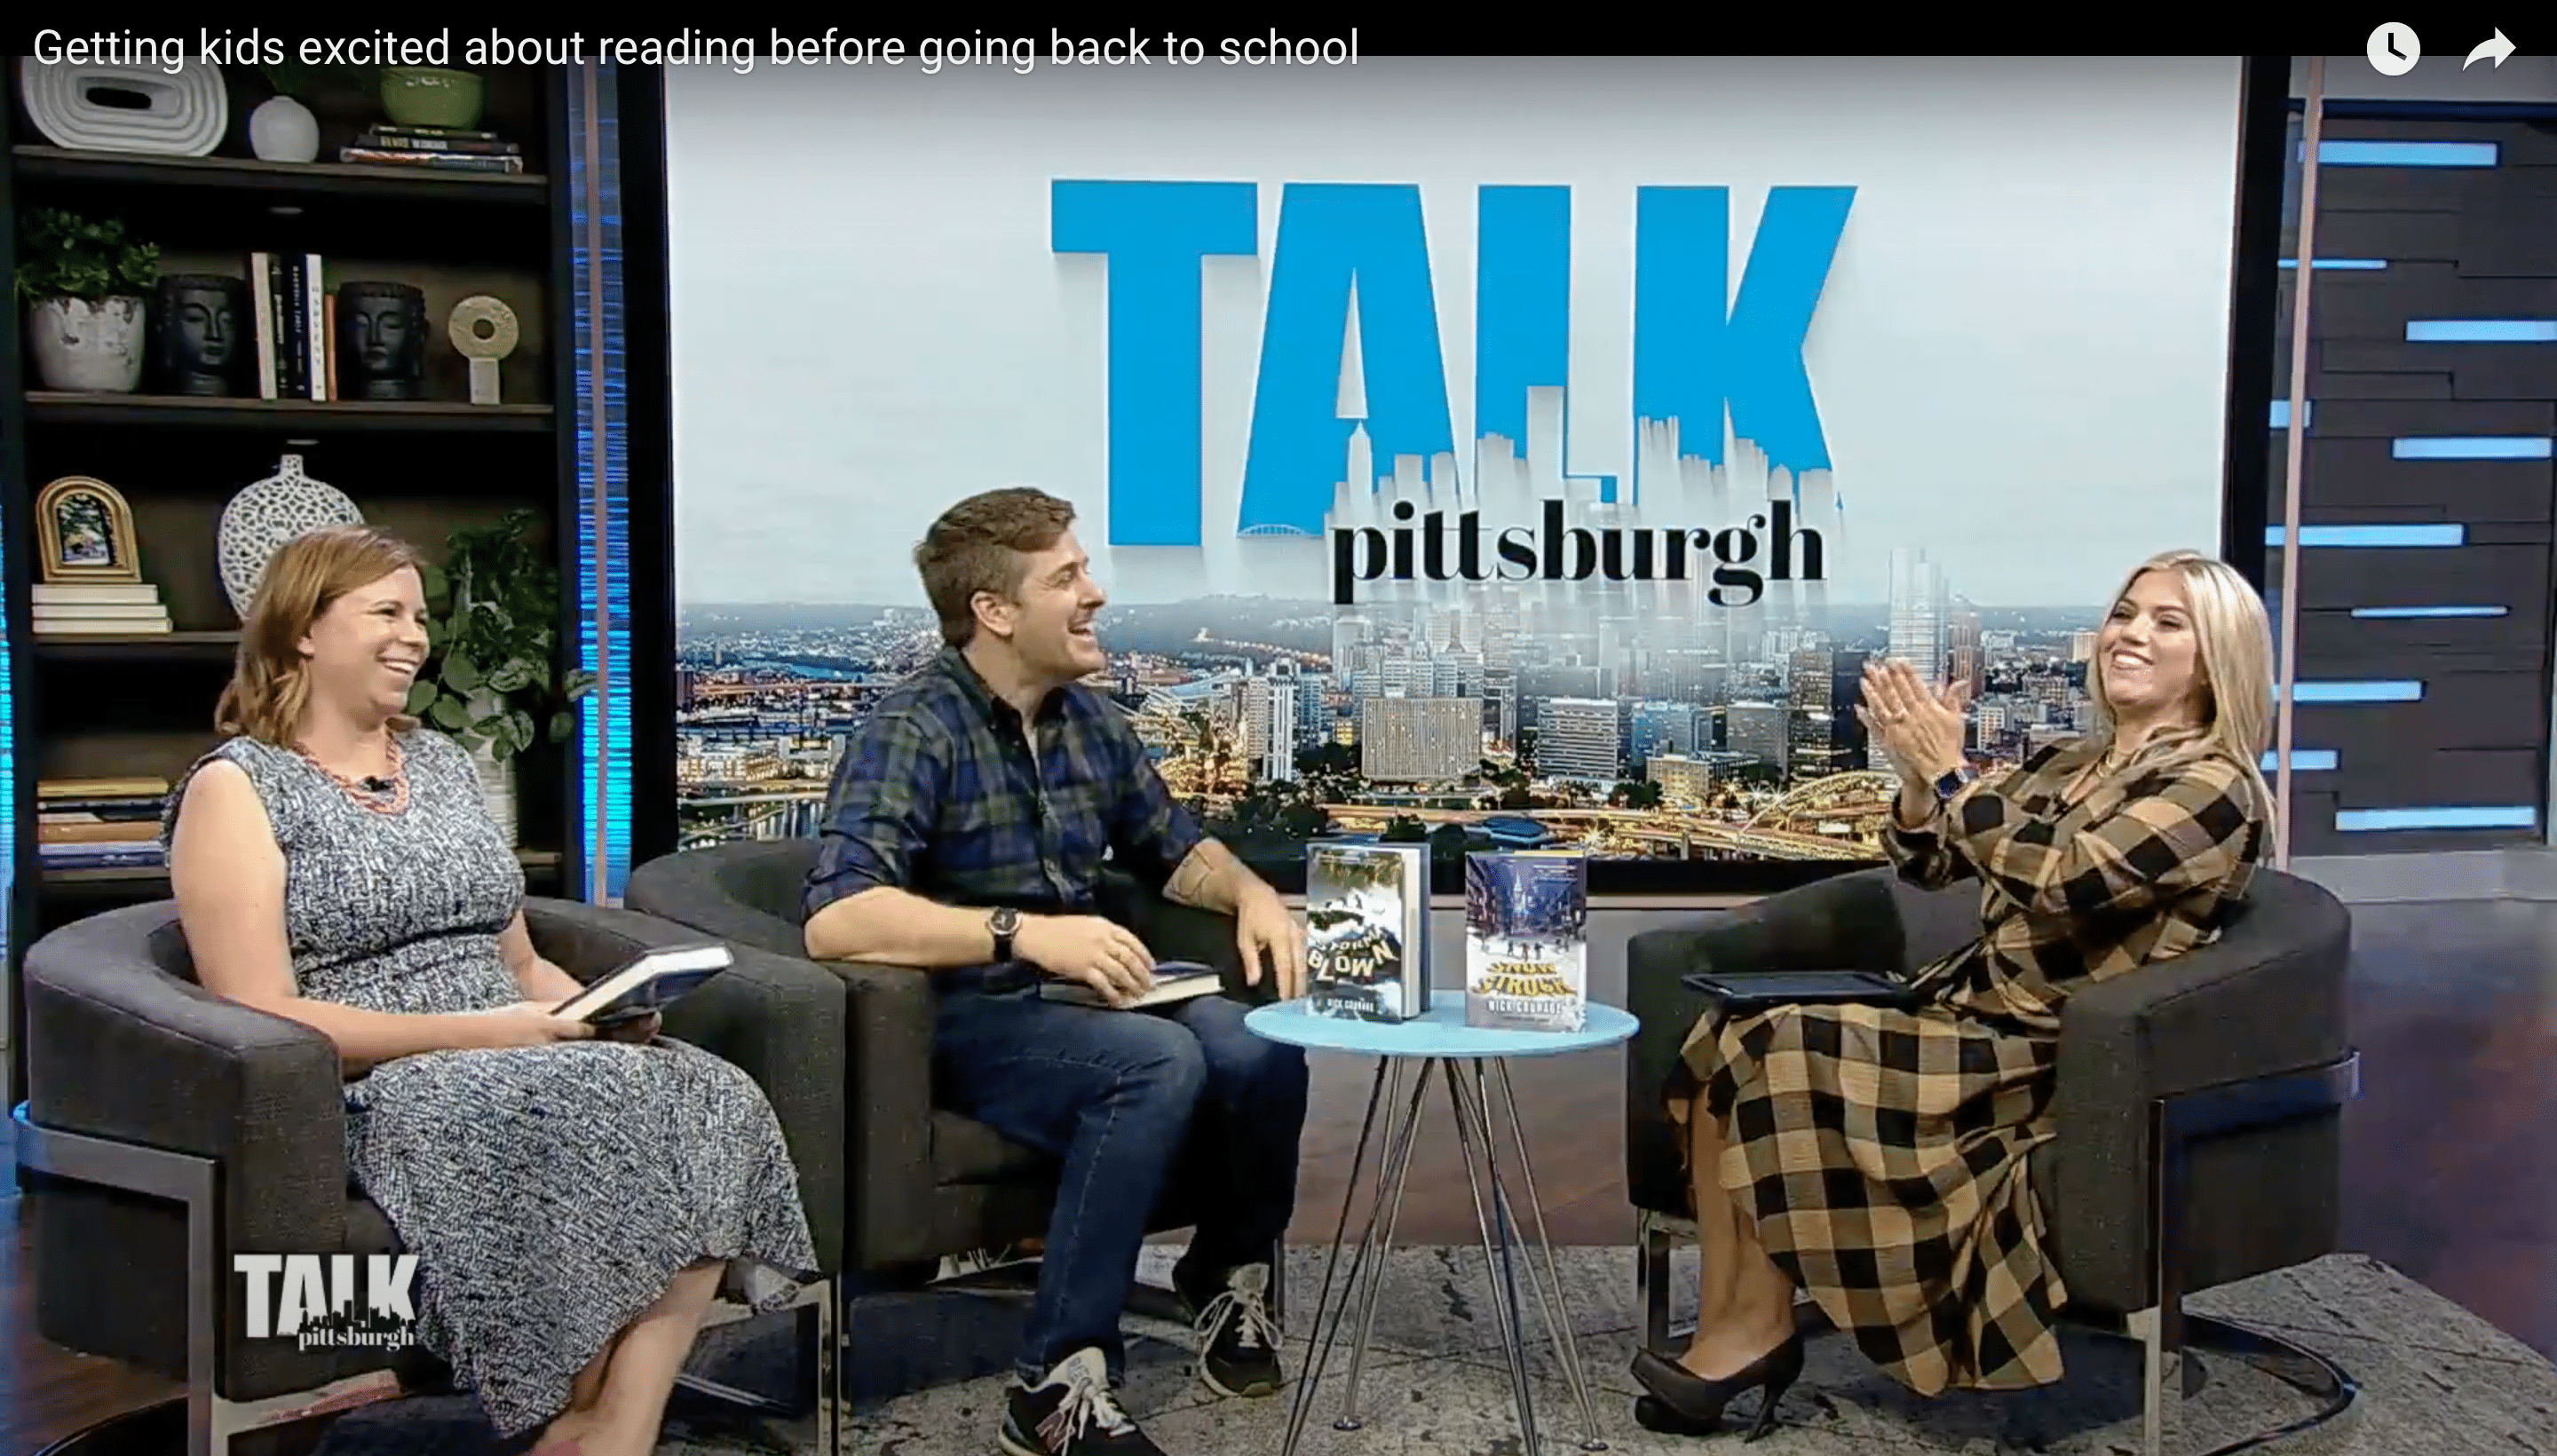 Video: Back to School Reading with Rachel on CBS Pittsburgh’s “Talk Pittsburgh”!